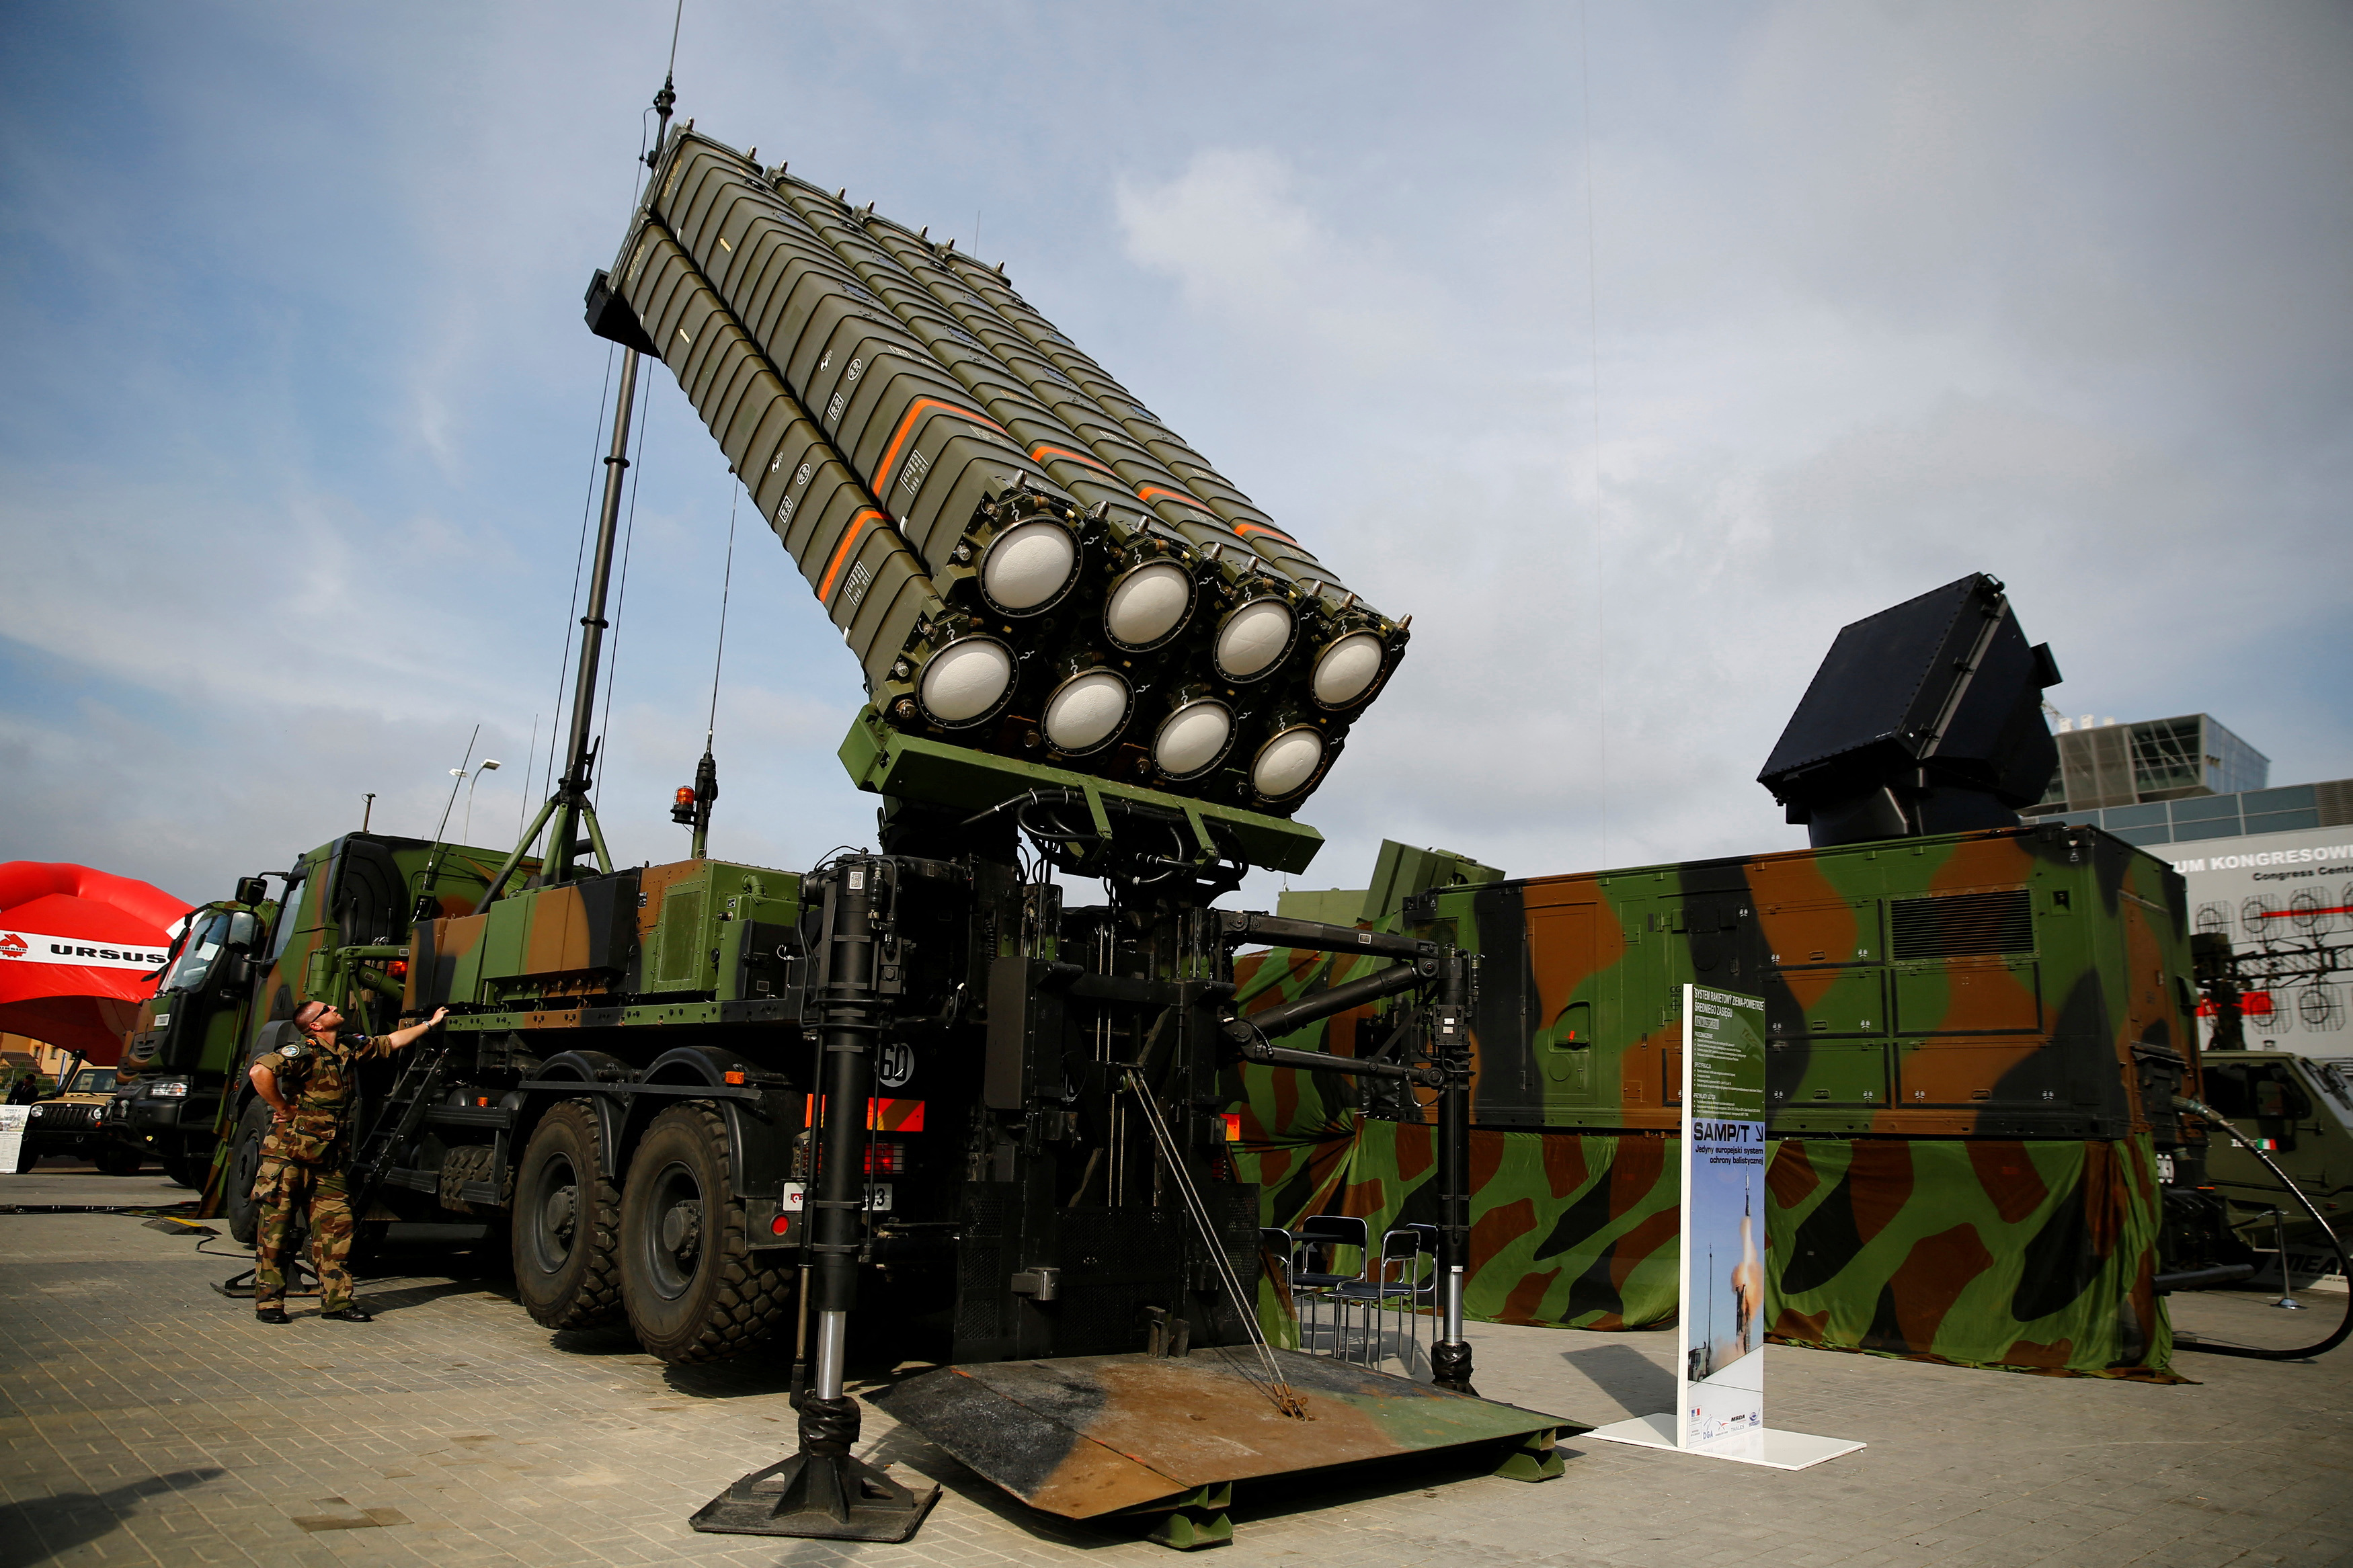 Soldiers present an anti-missile system SAMP/T by Thales at an international military fair in Kielce